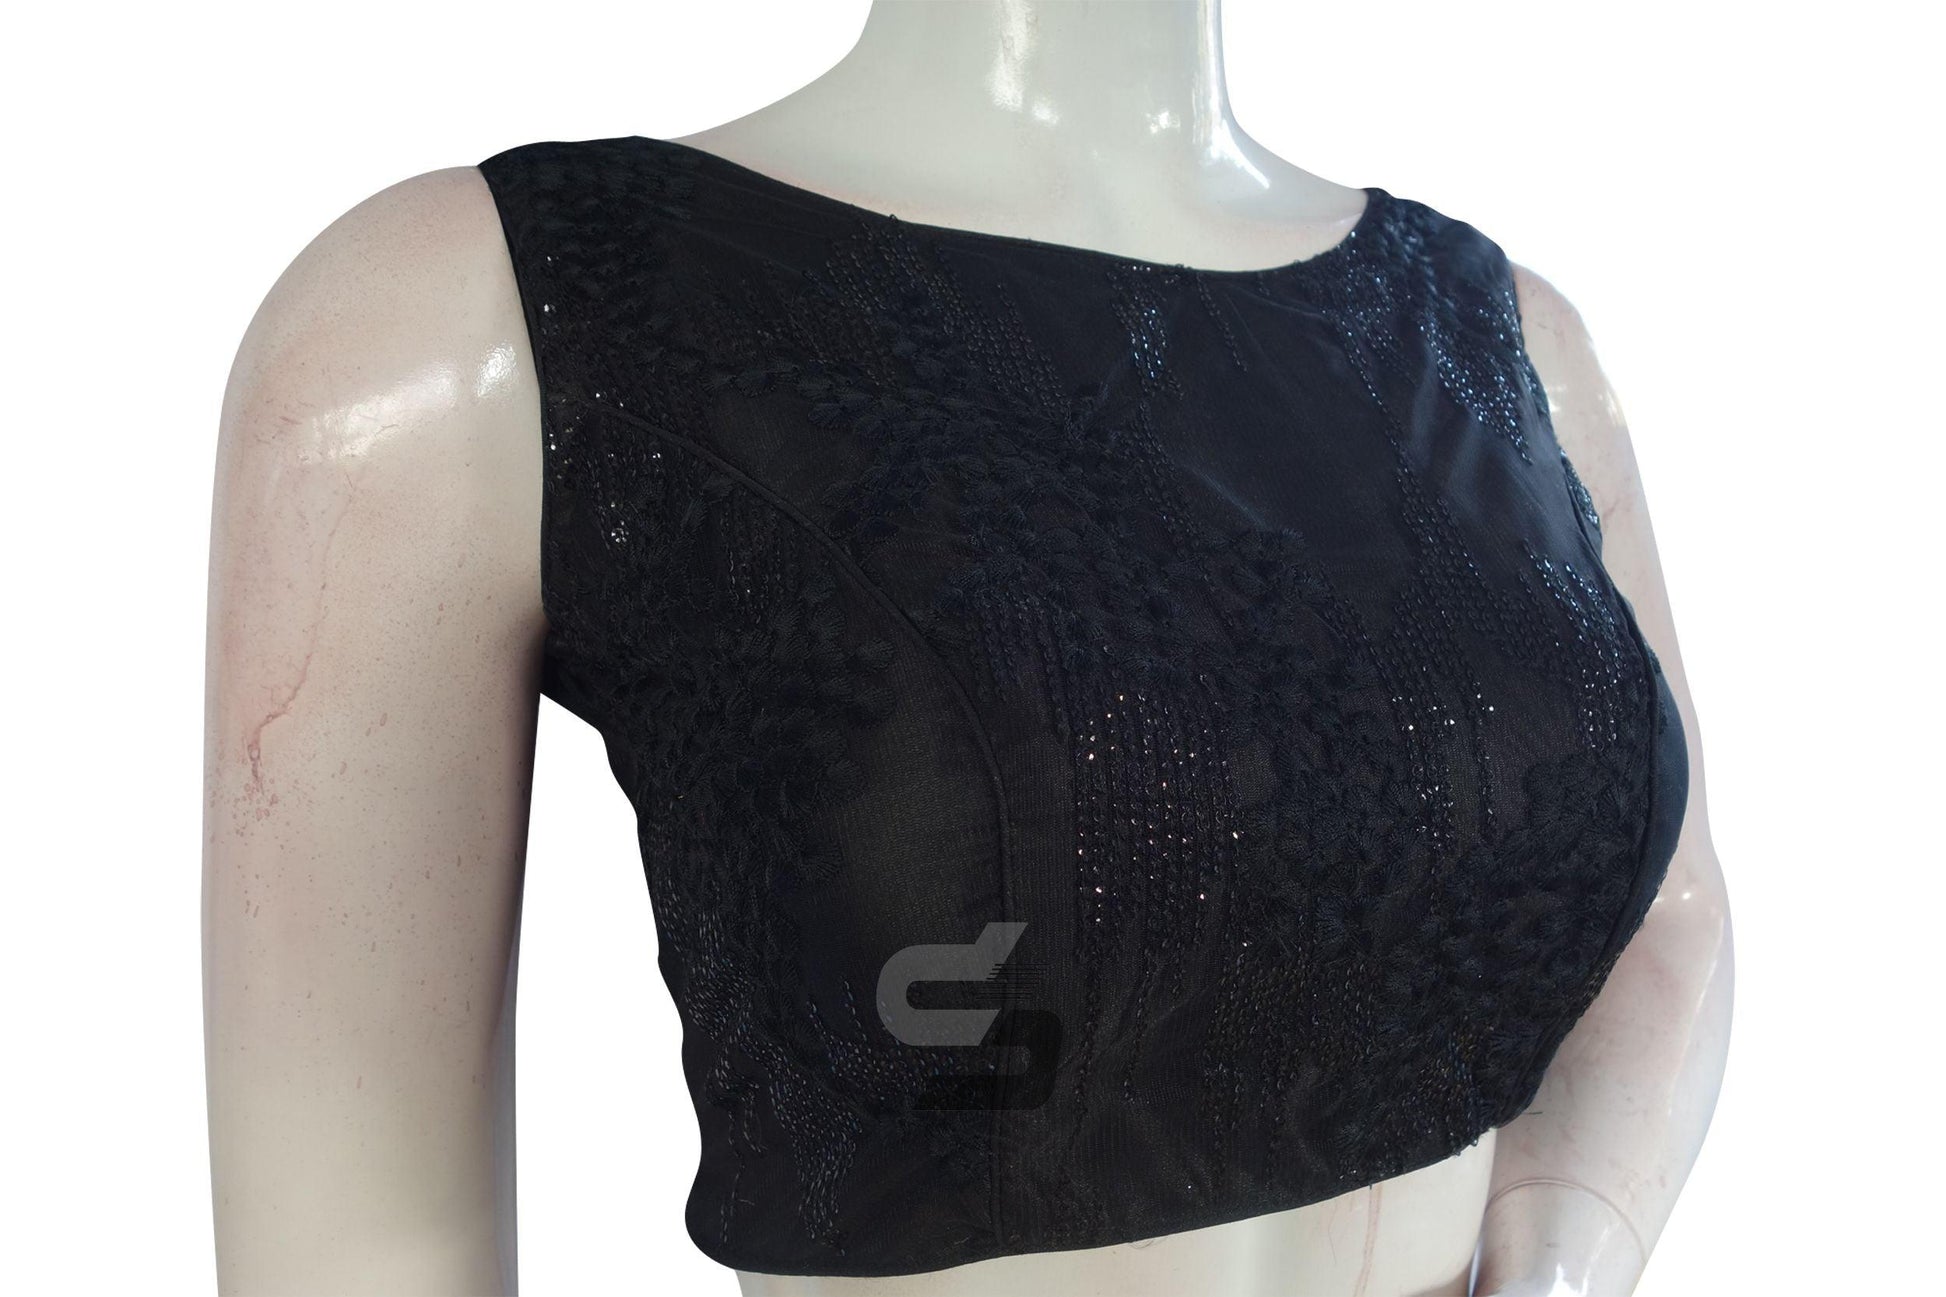 Black Color Netted Designer Embroidery Readymade Blouse - D3blouses